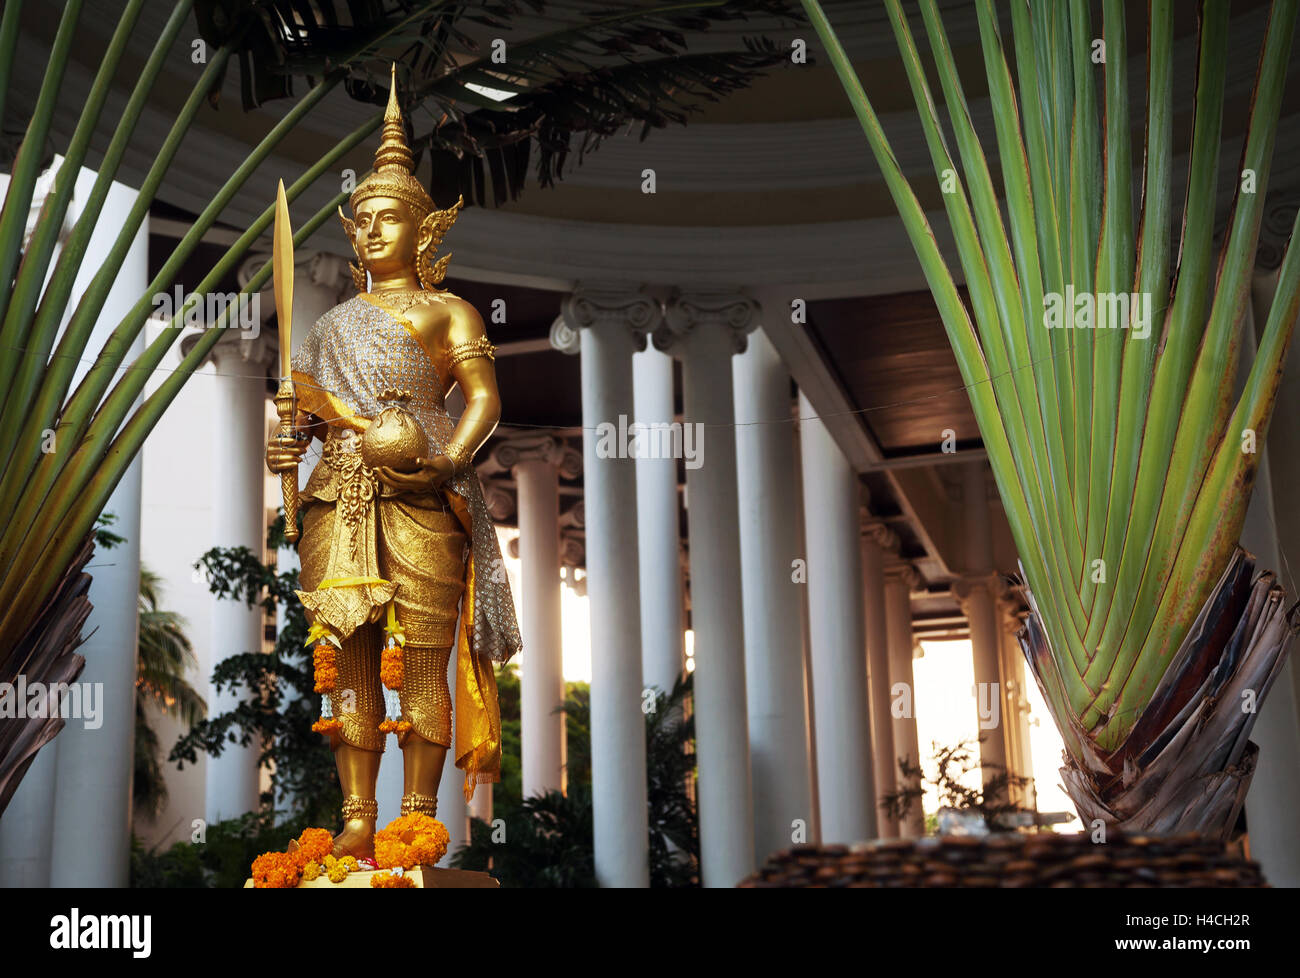 Golden Rama statue wearing traditional costume. Gold Hindu god sculpture holding sword and cloth sack Stock Photo